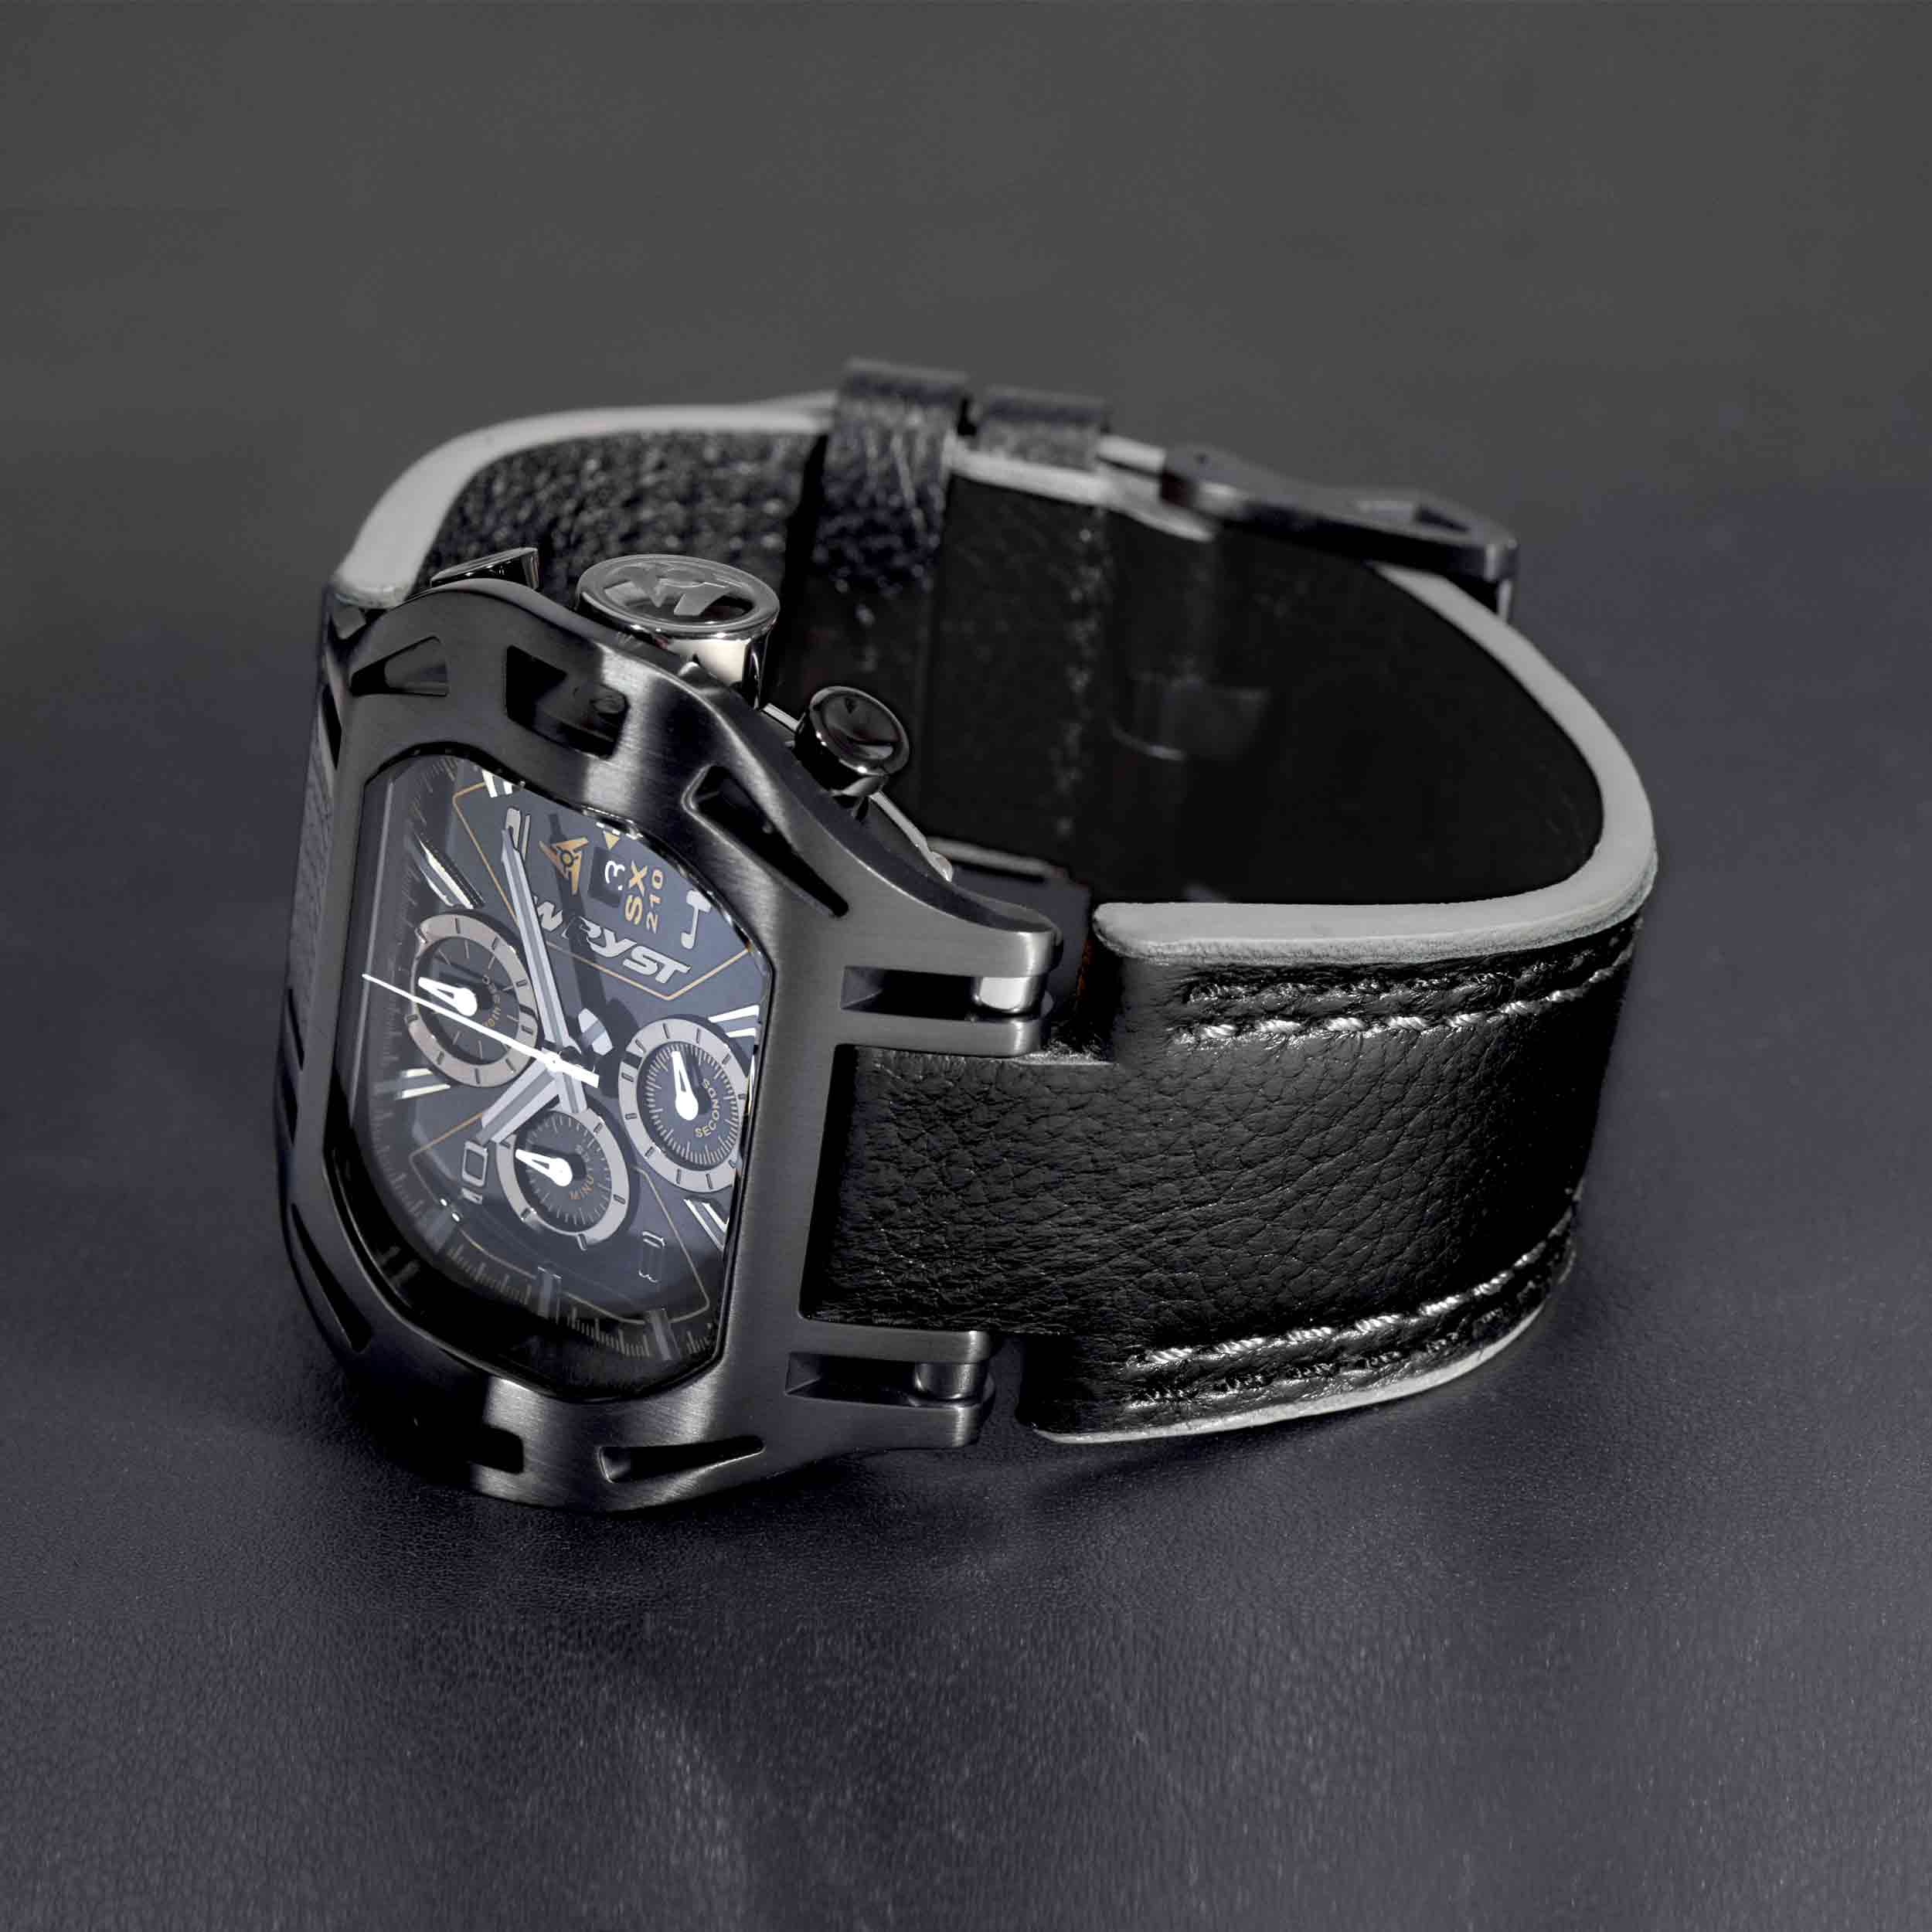 Men's Chronograph Watches Wryst Force